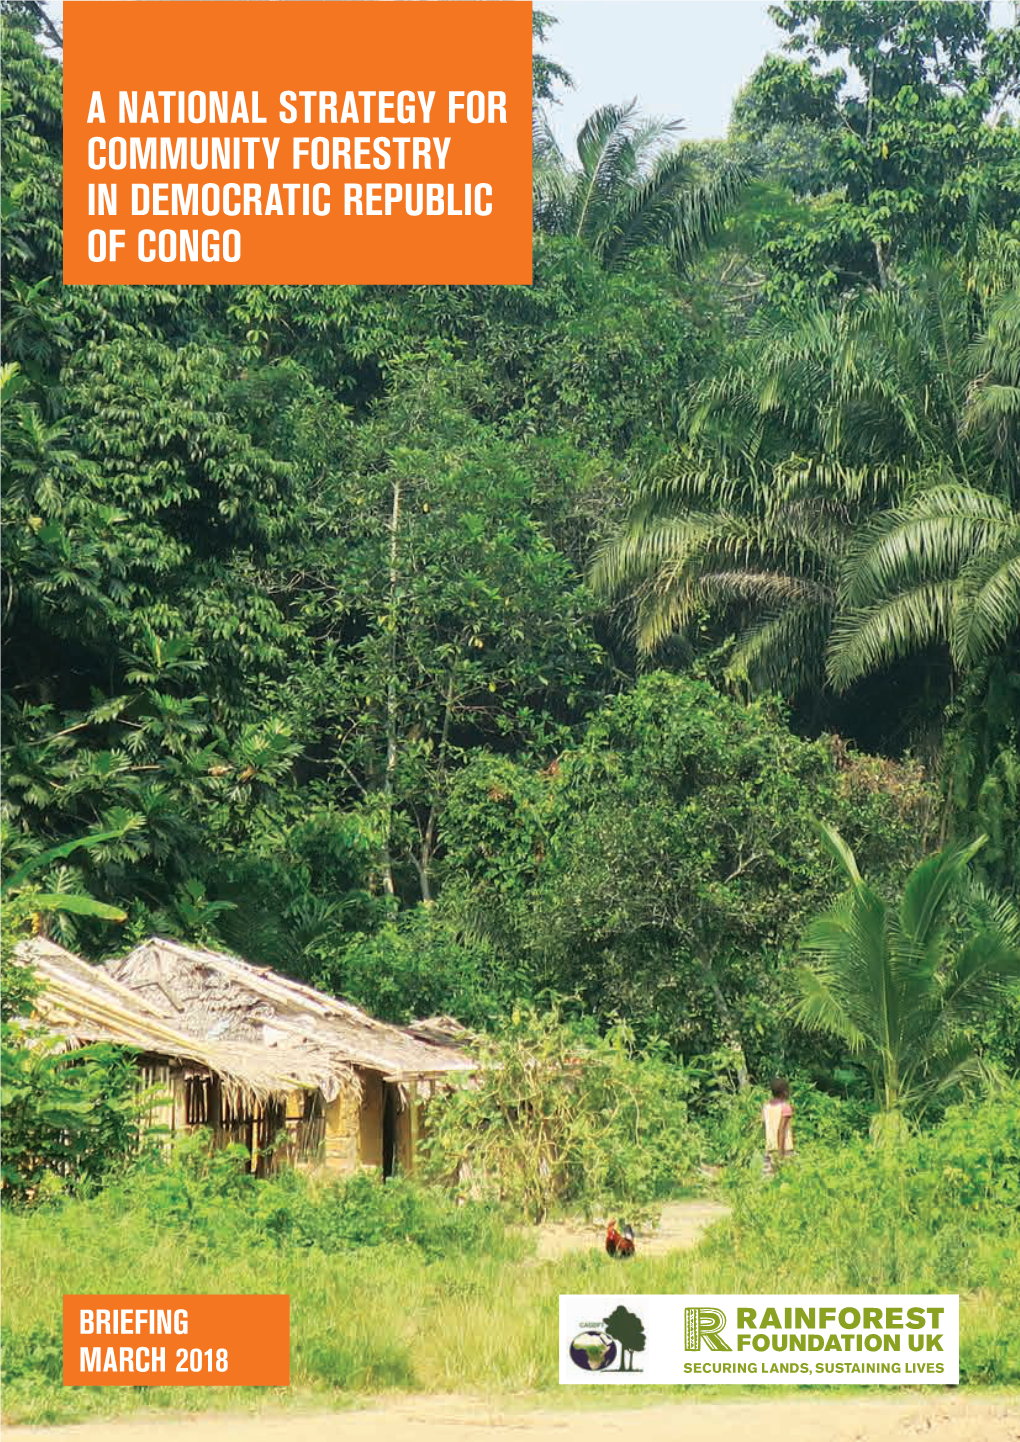 A National Strategy for Community Forestry in Democratic Republic of Congo